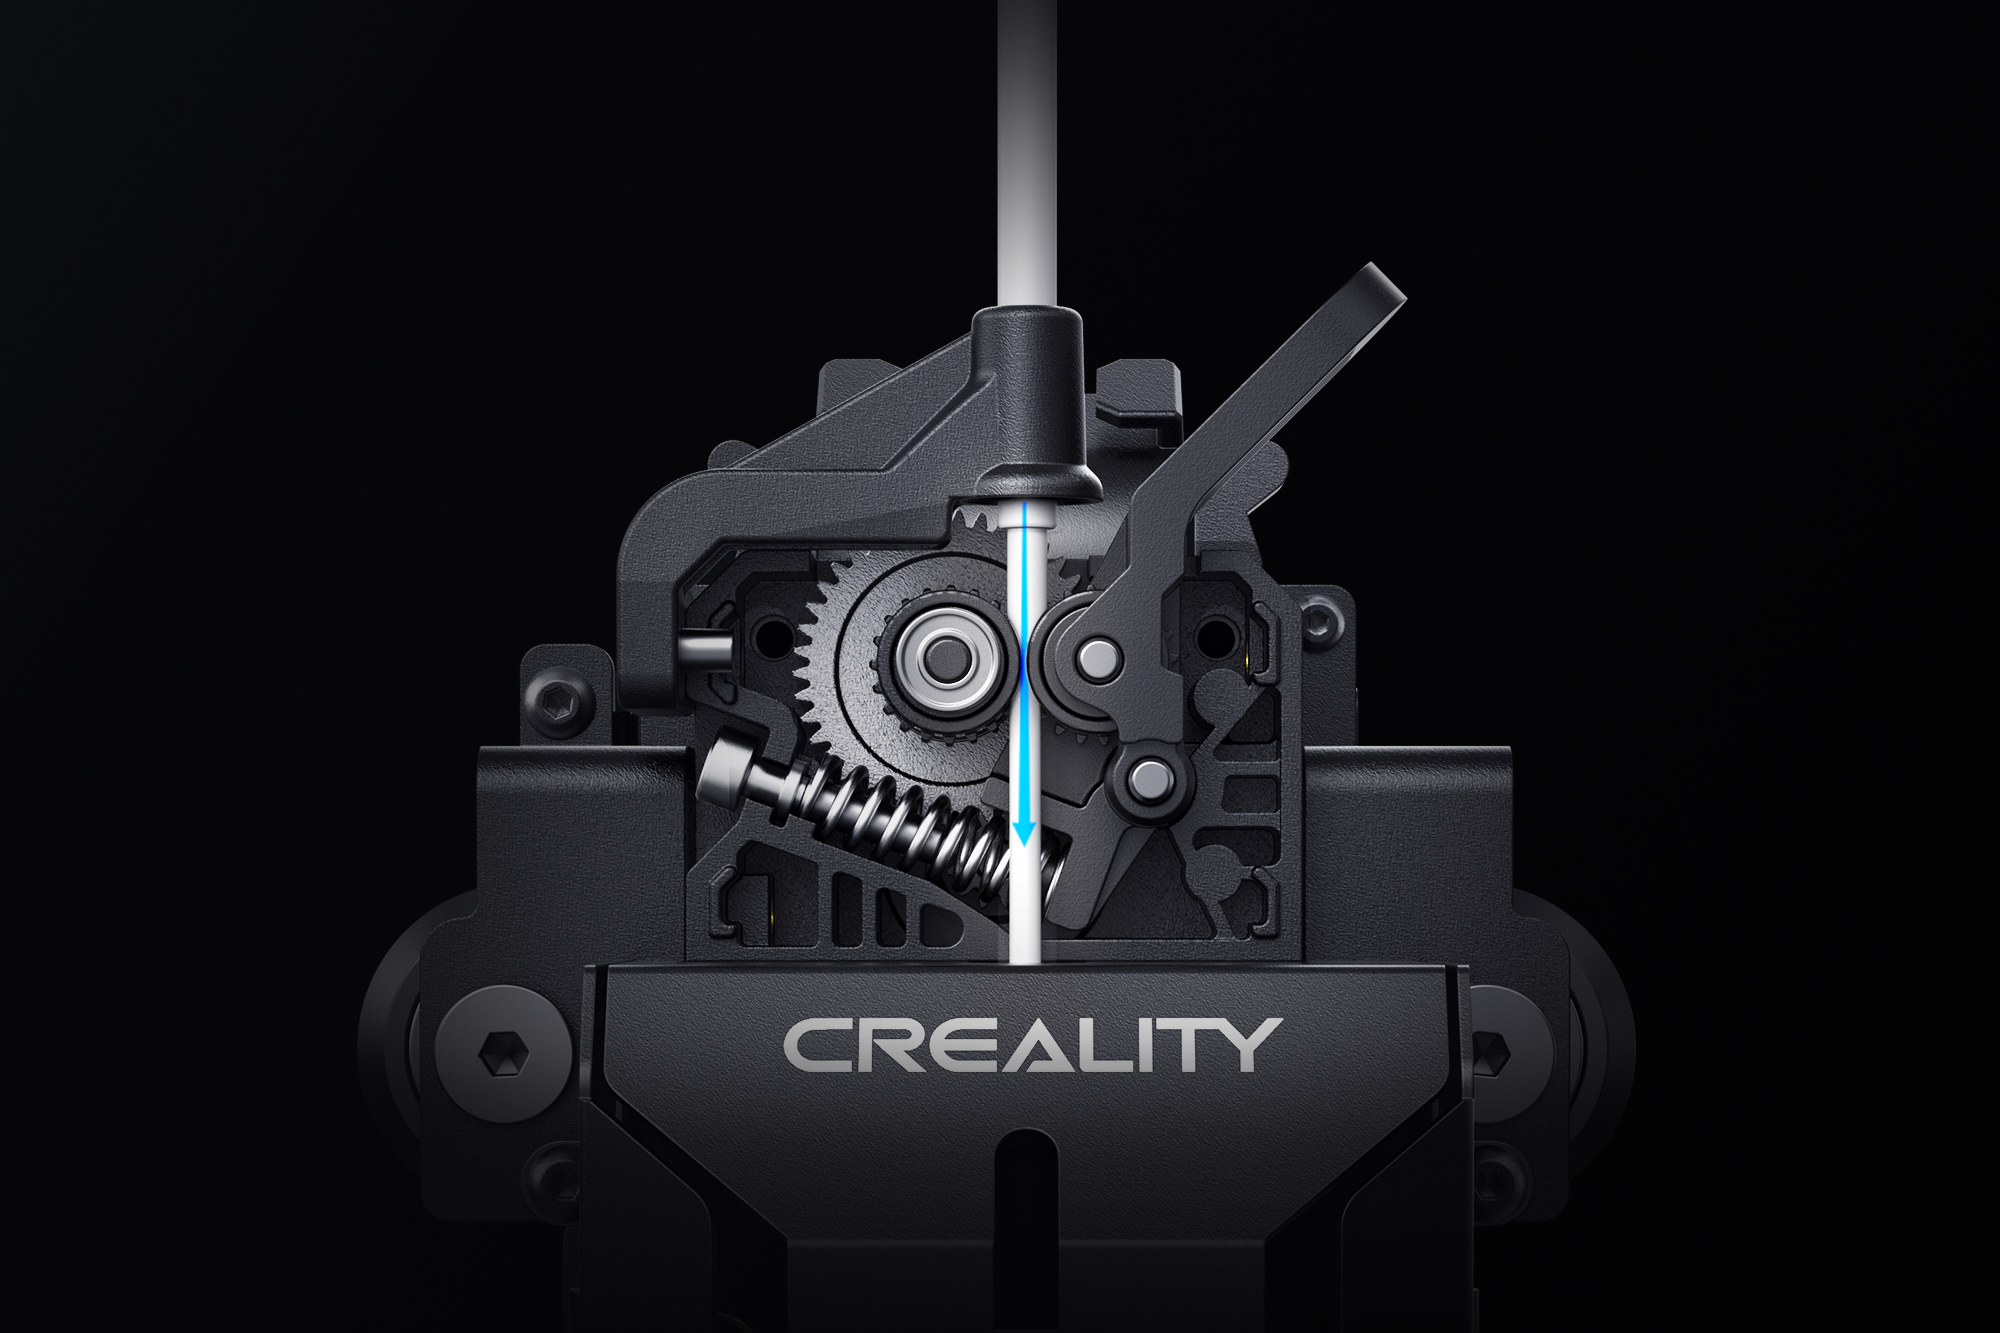 Ender 5 S1 | Creality Launches the Ender-5 S1 3D Printer